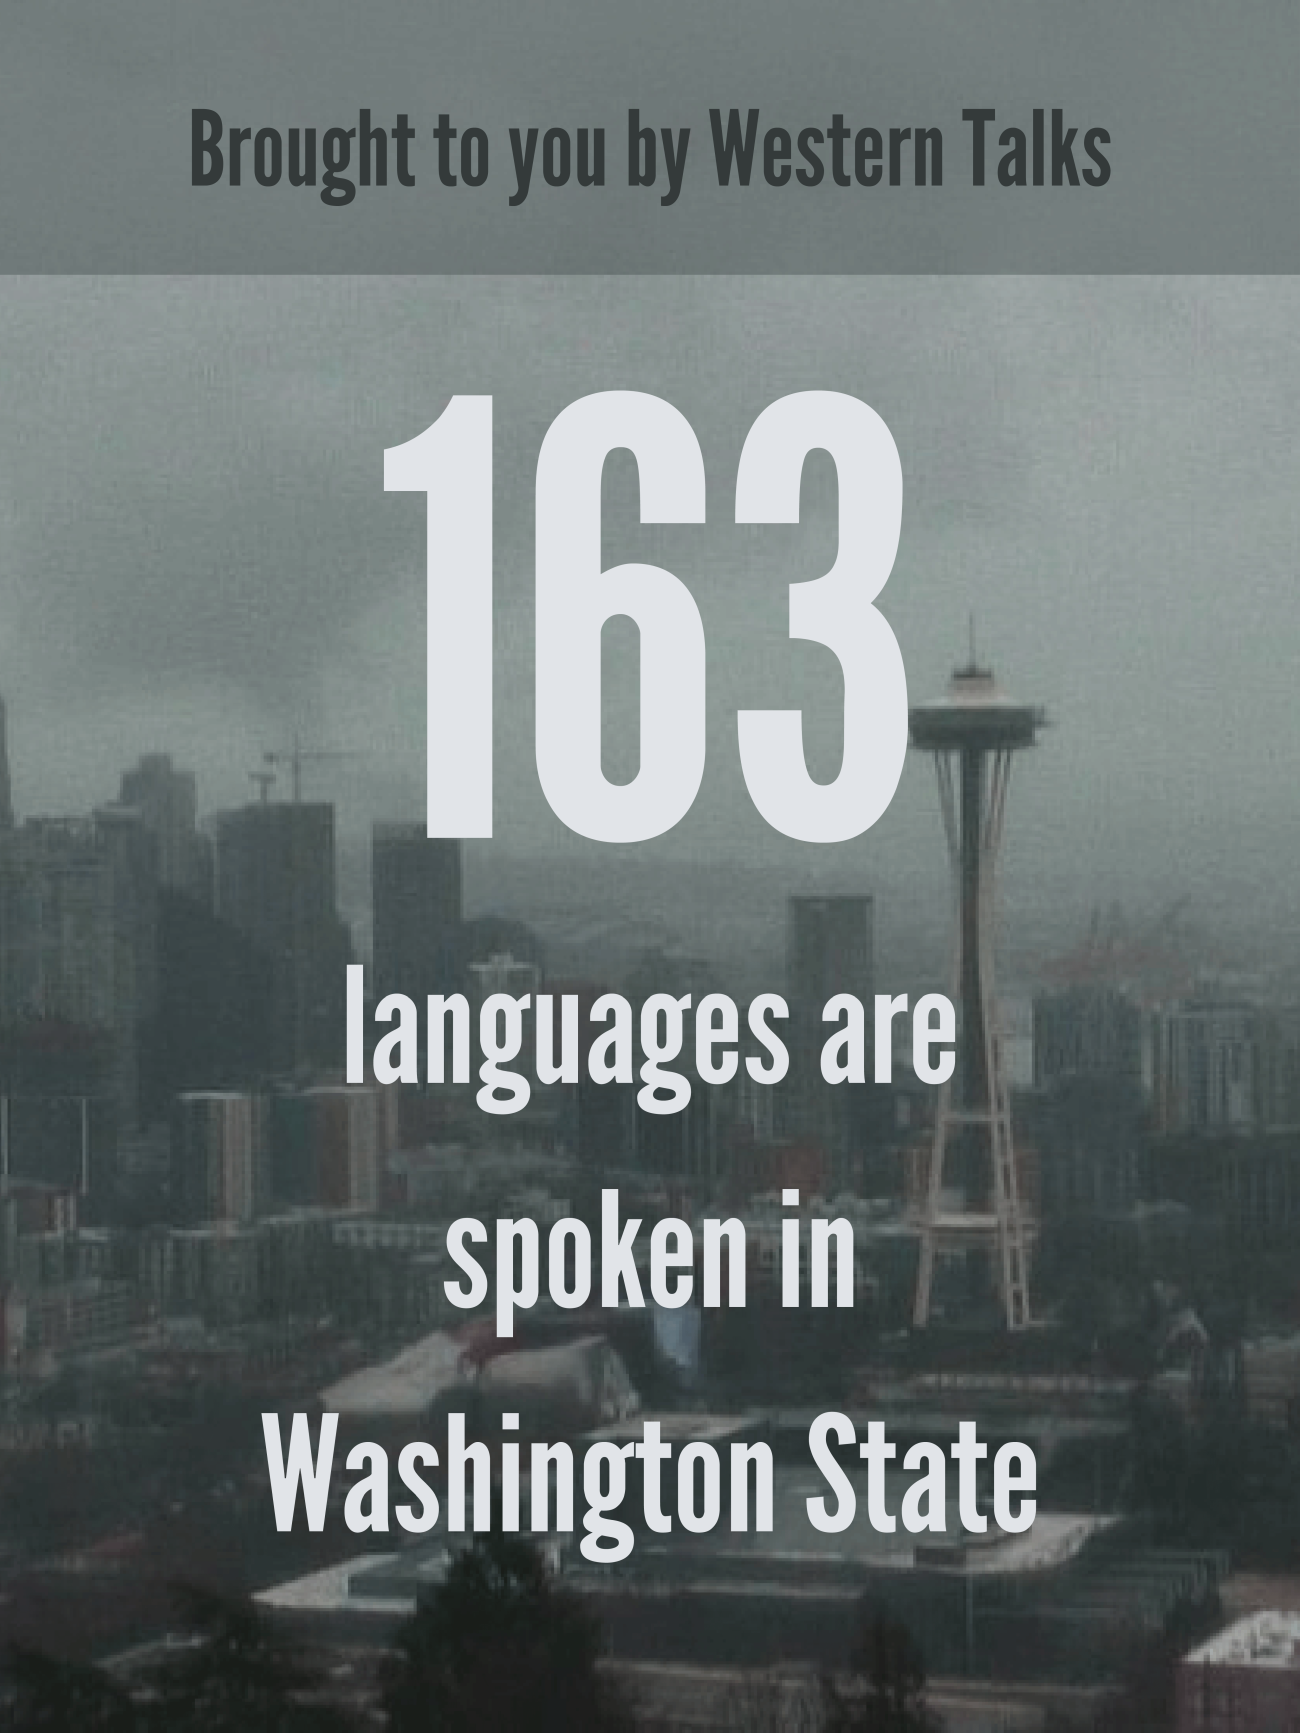 Linguistics Posters. 163 languages are spoken in Washington State